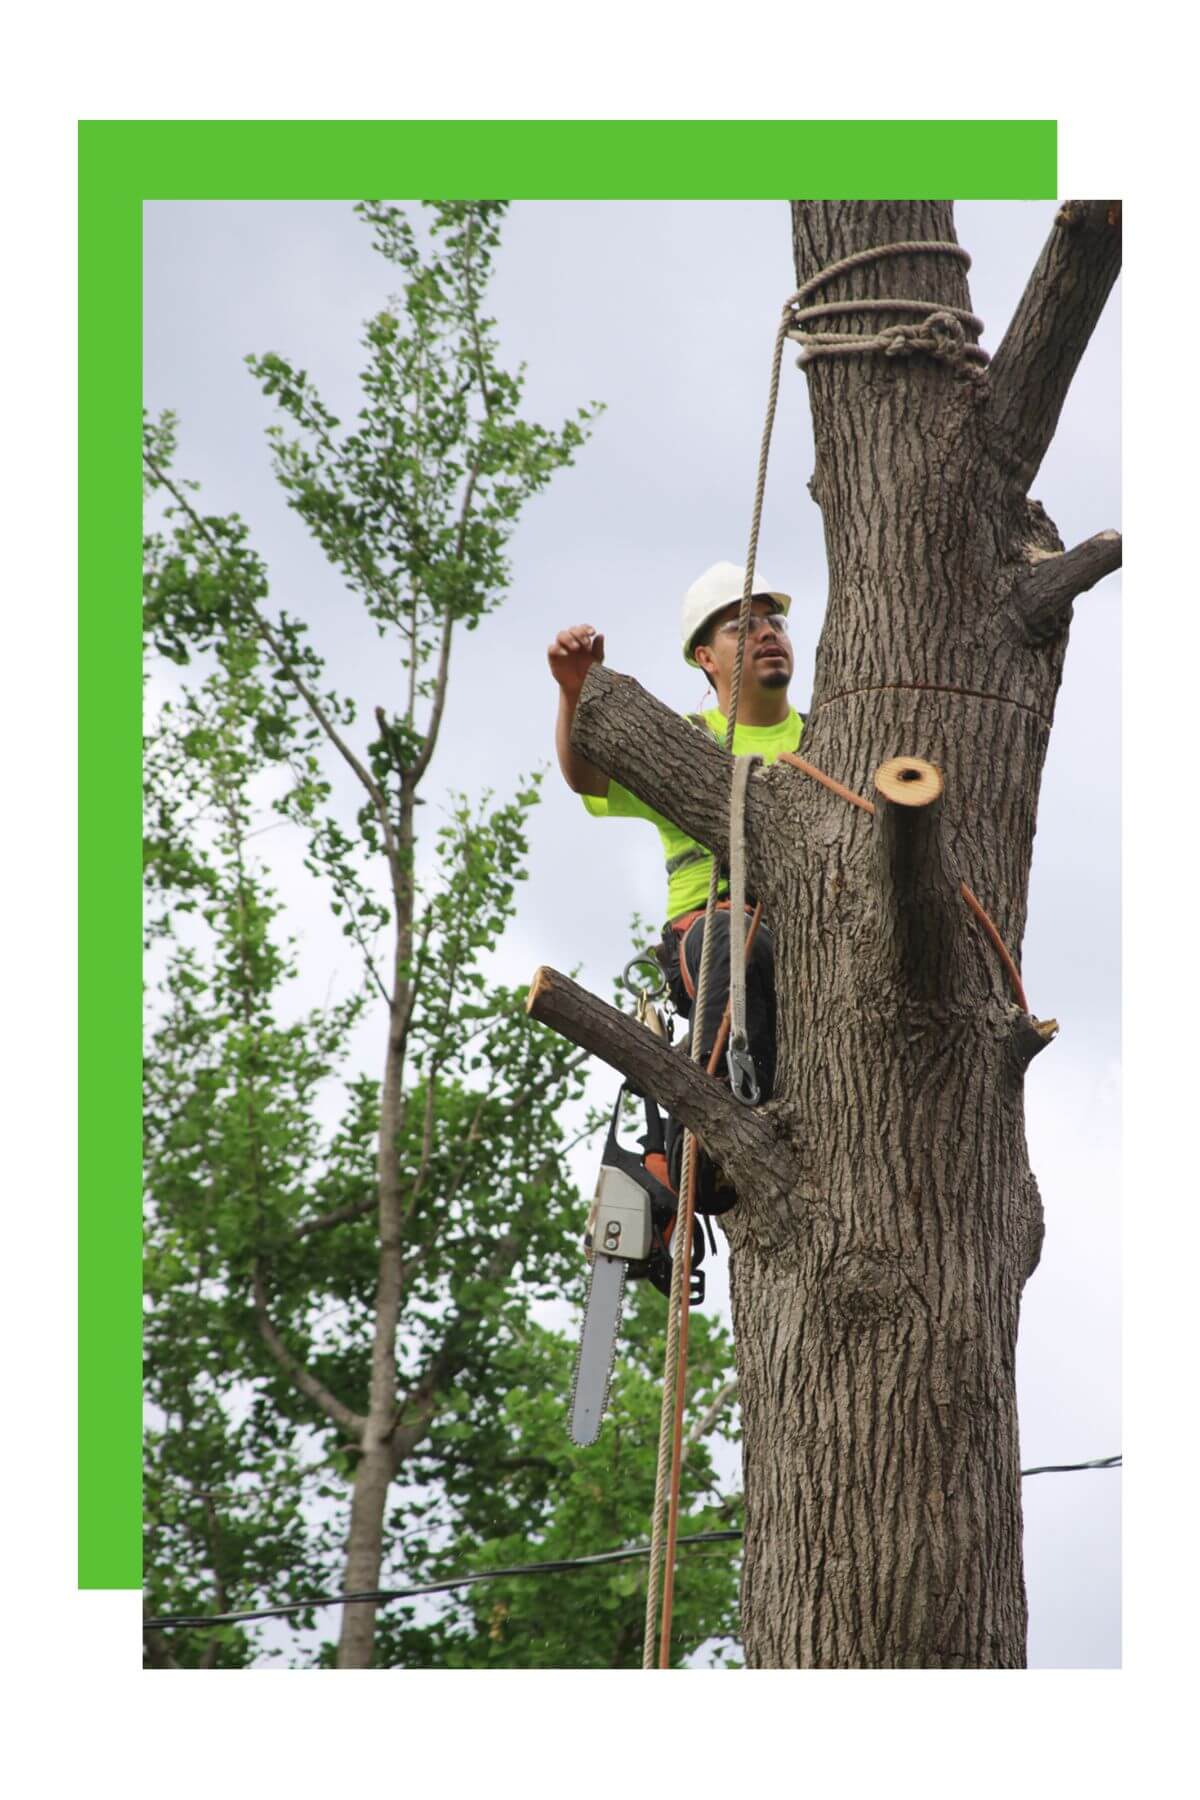 An image of a professional Etobicoke tree removal